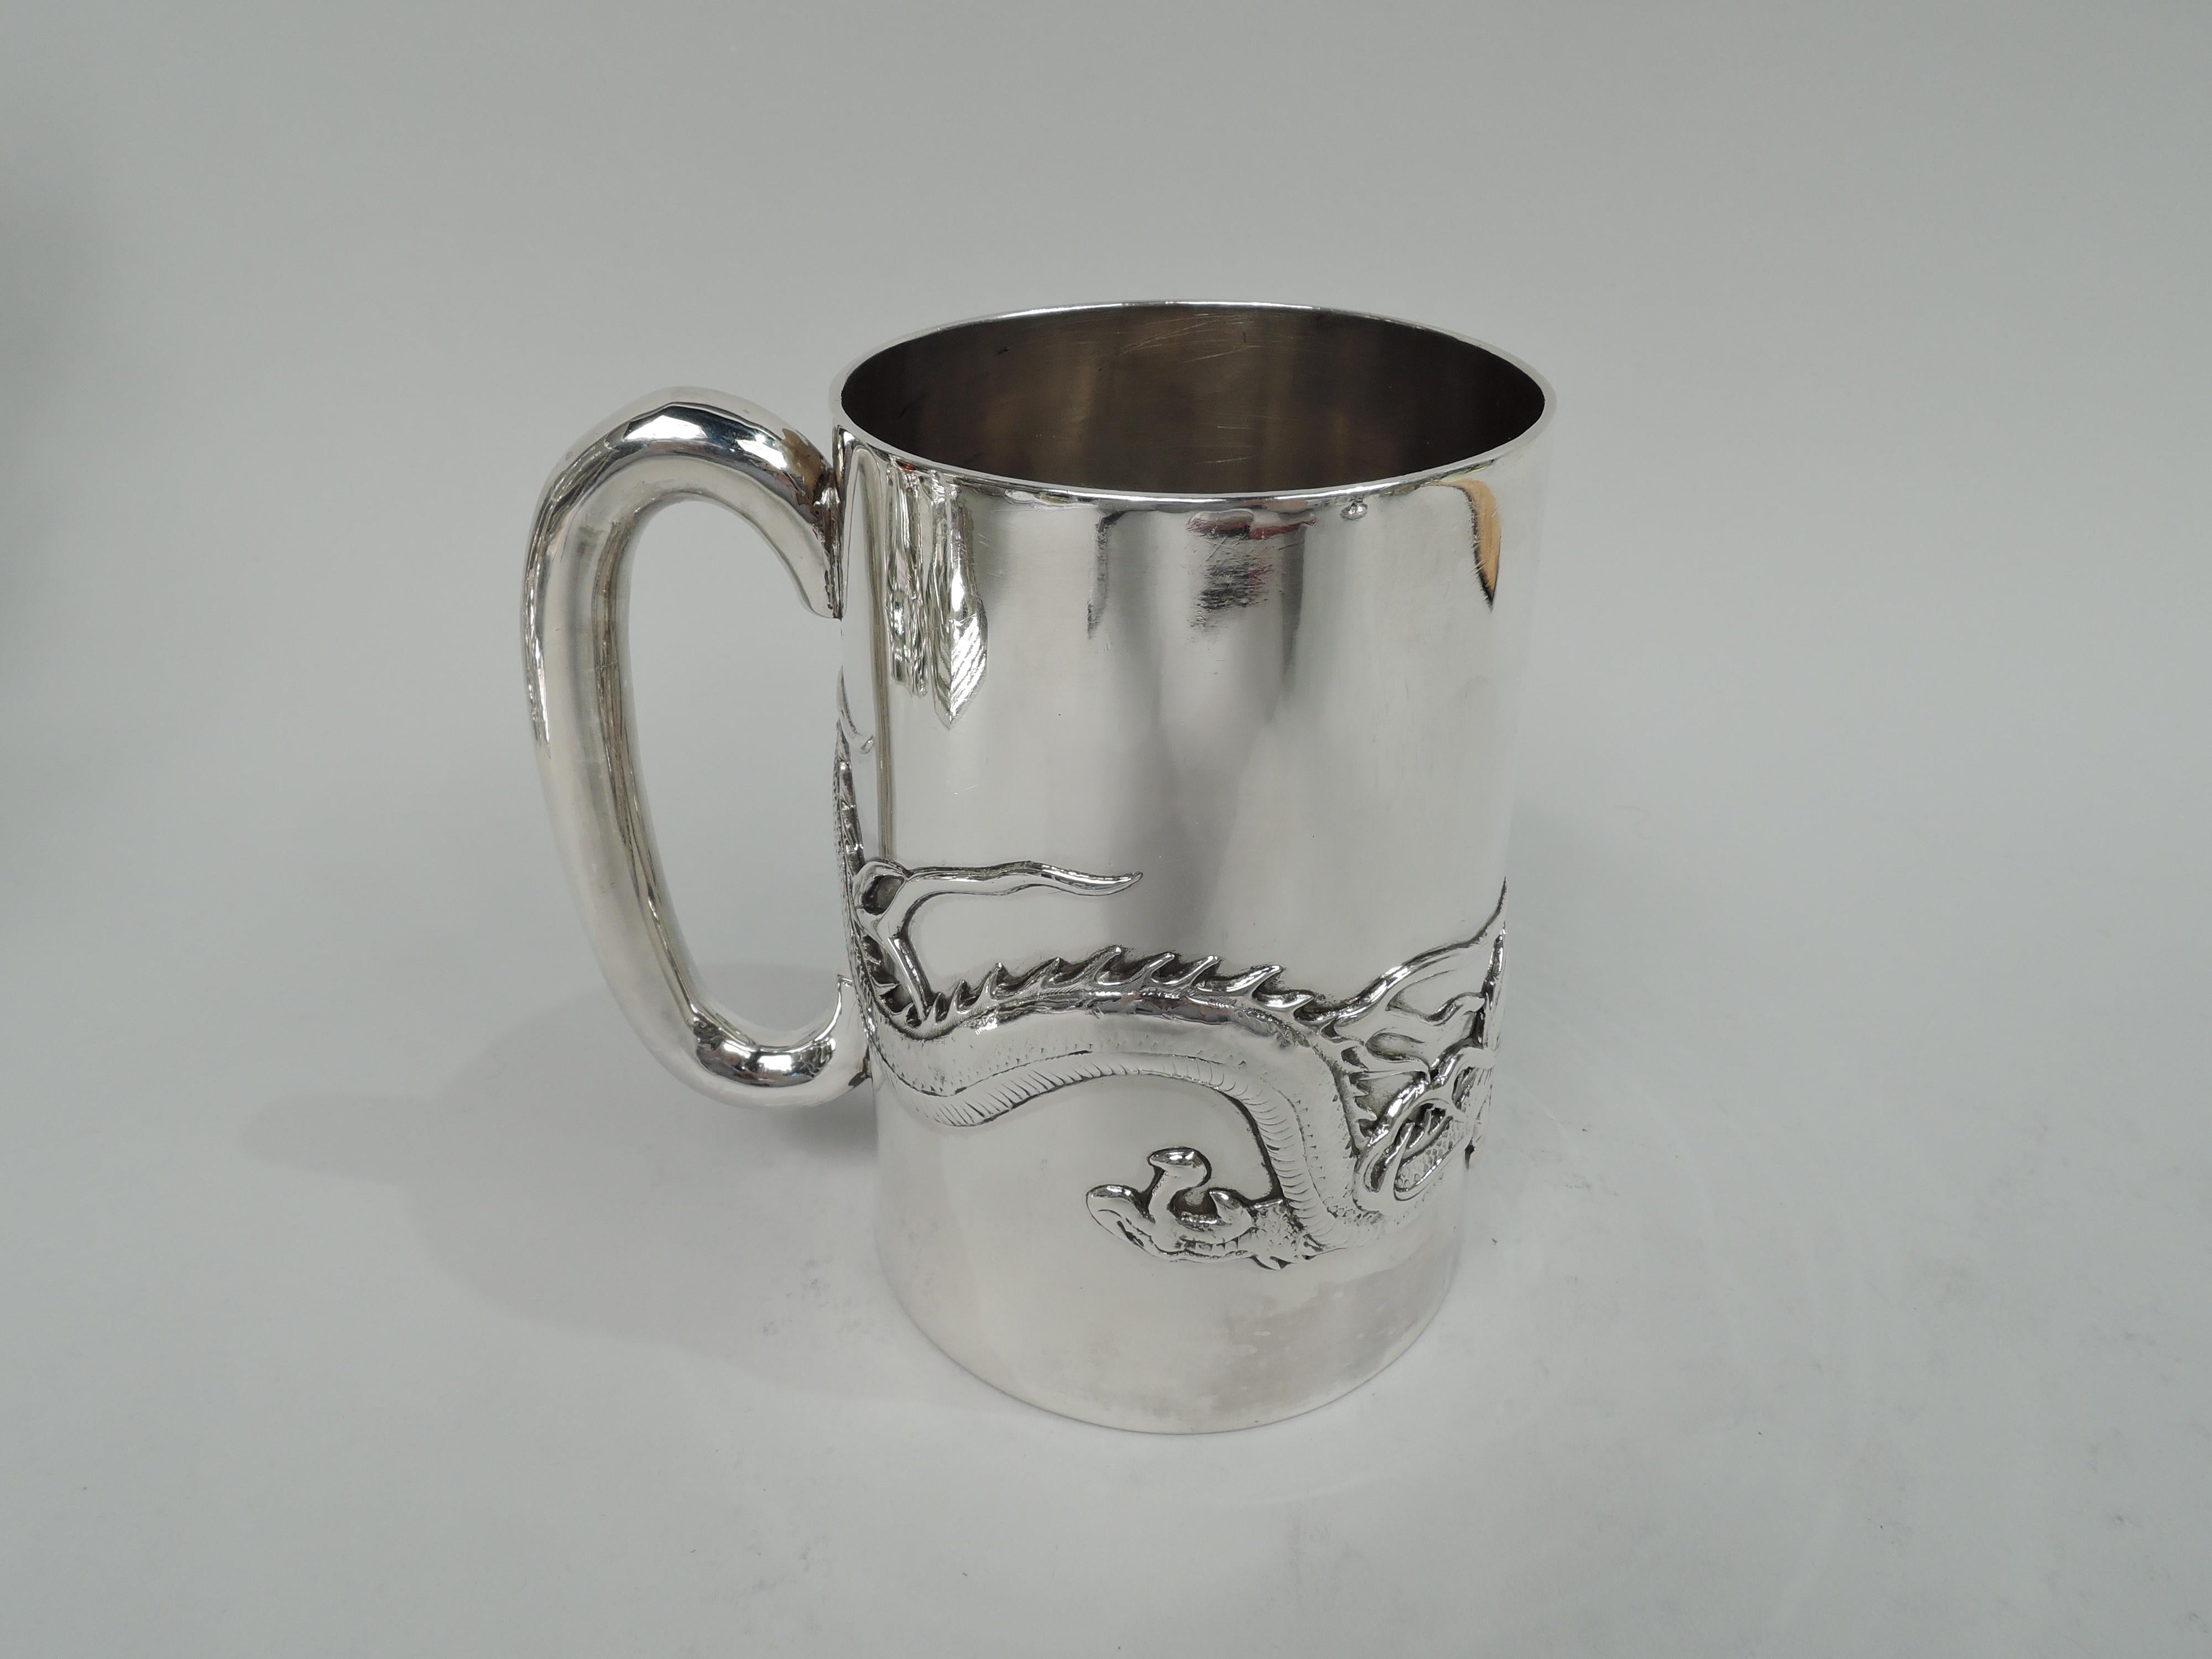 Chinese silver mug, ca 1910. Straight and upward tapering sides and c-scroll handle. A spare form enlivened with applied wraparound dragon chasing its tail. Marks include stamp for Wang Hing, a maker and retailer in Canton and Hong Kong. Weight: